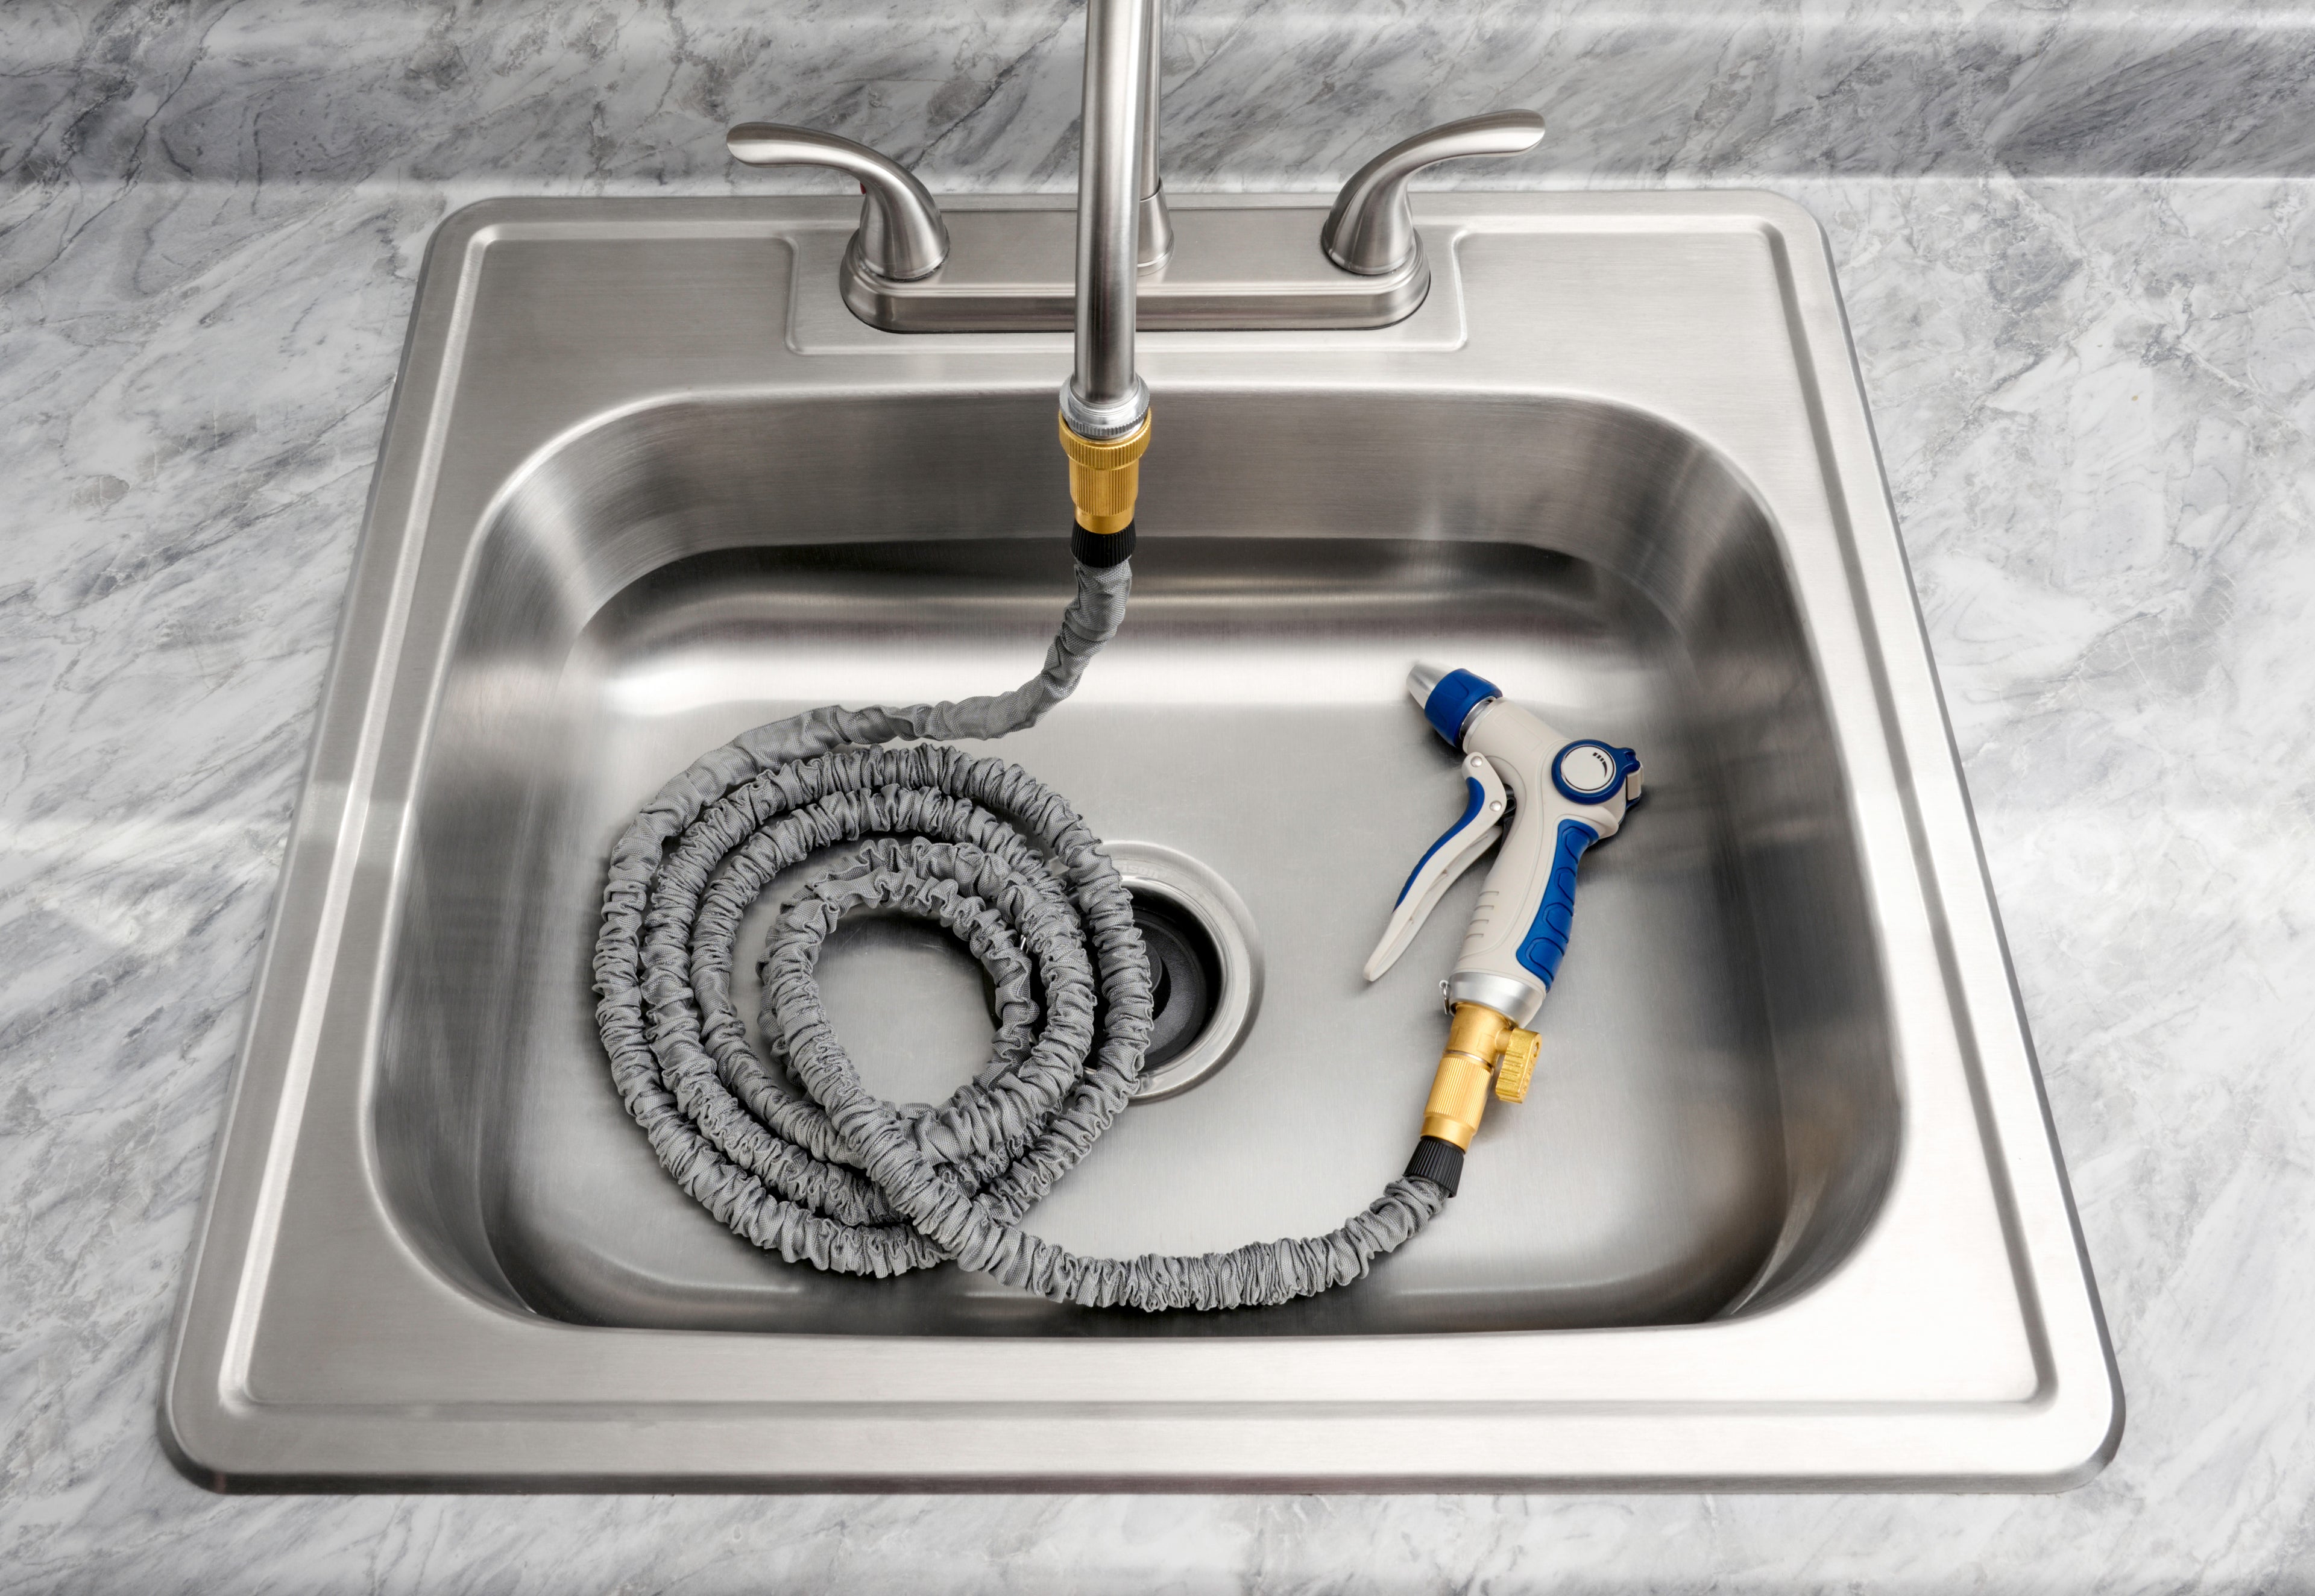 Load video: How To Attach A Garden Hose To A Kitchen Faucet